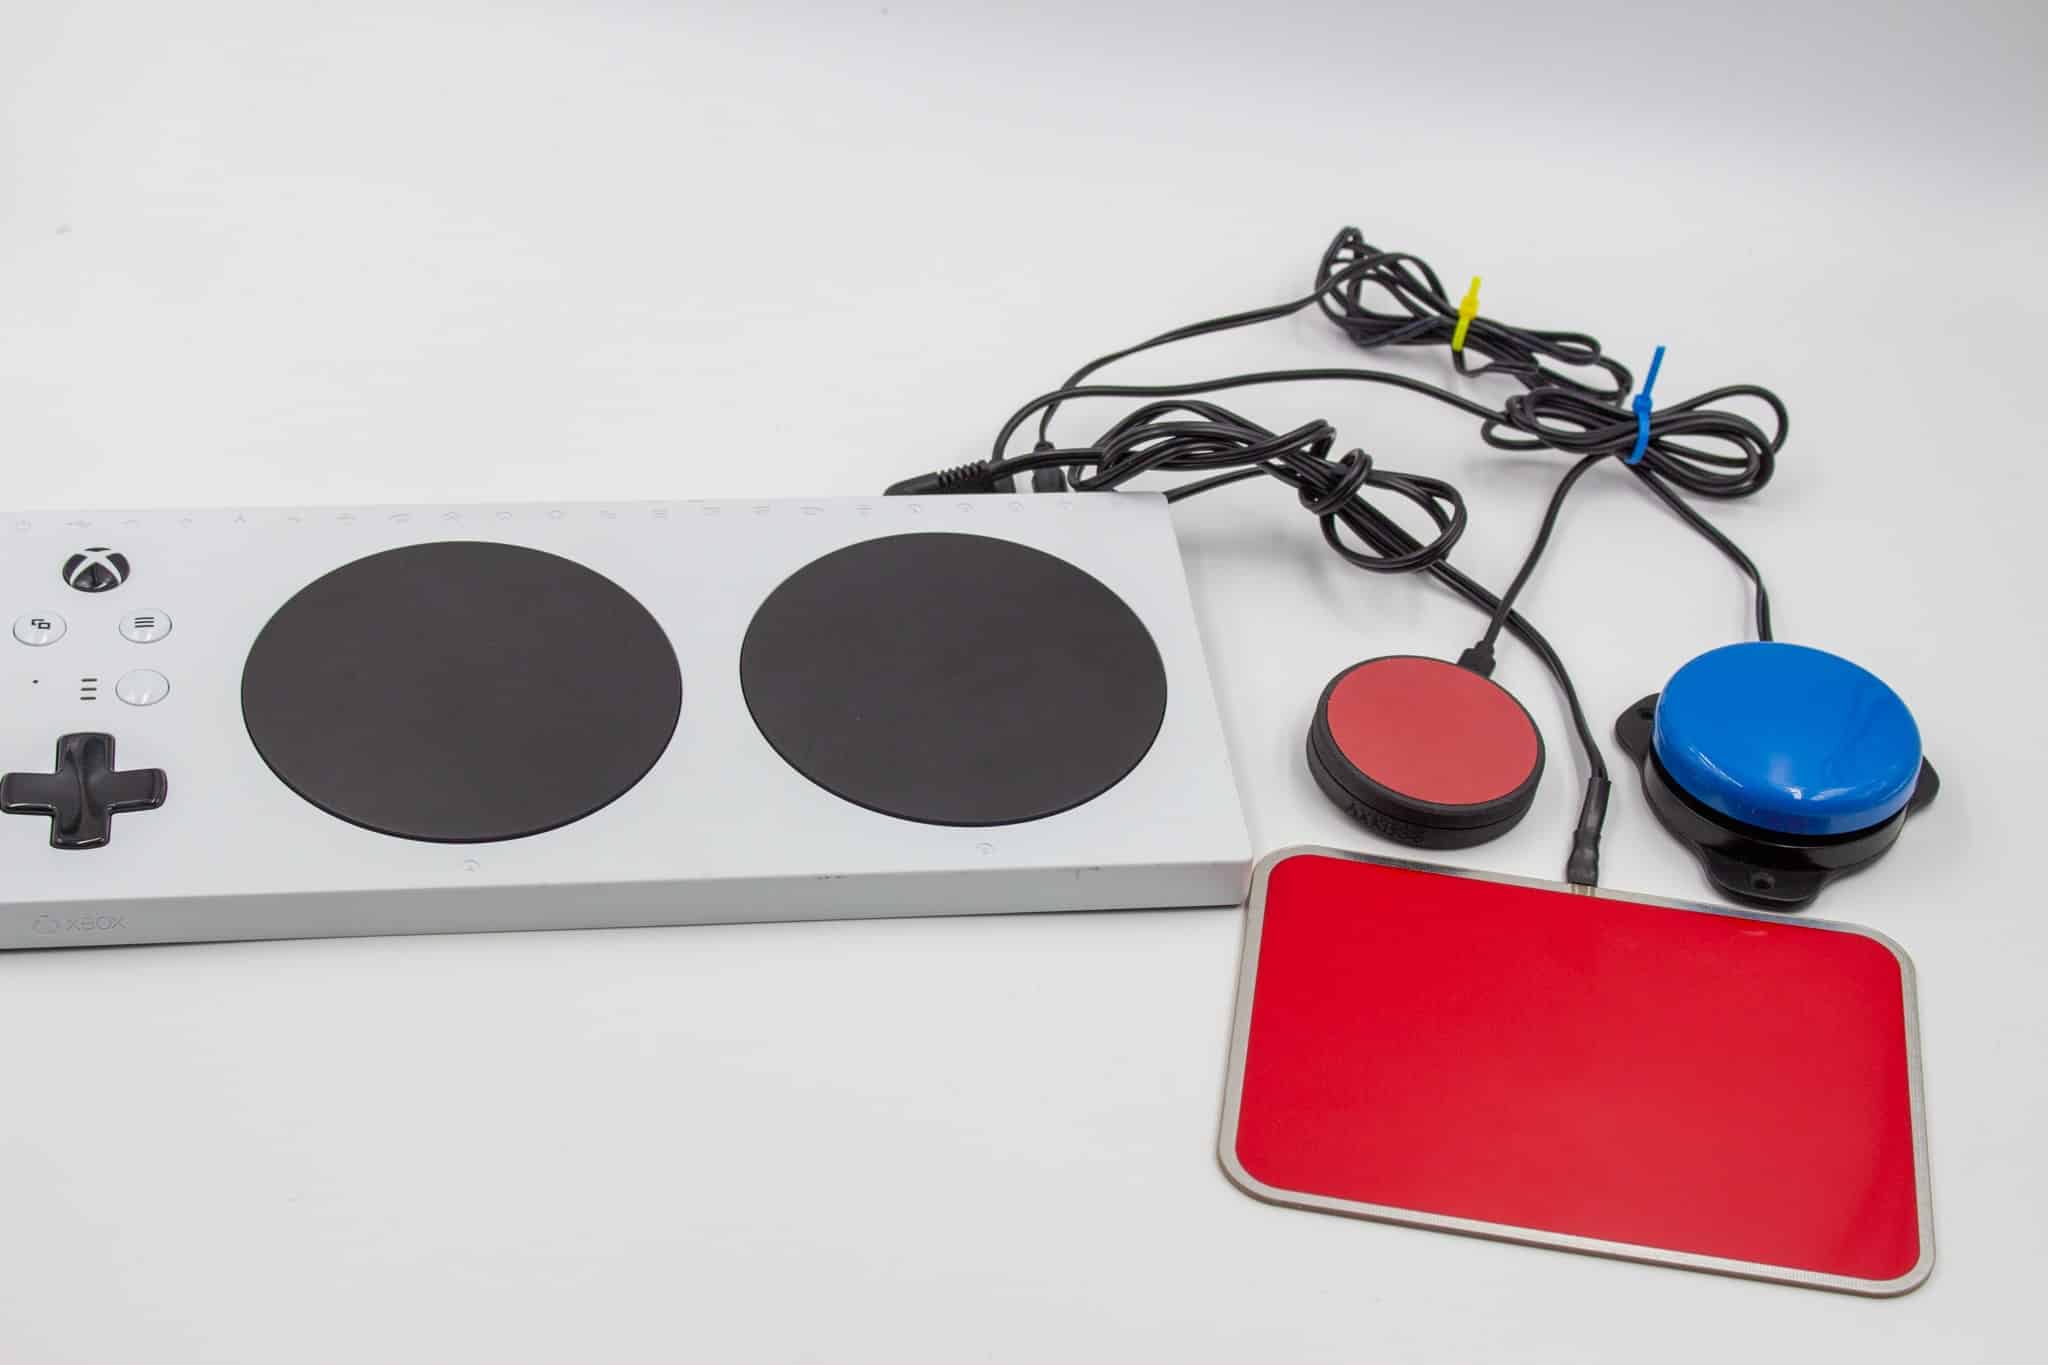  A red and blue button placed behind a red touchpad. They are all connected to an Xbox Adaptive Controller.